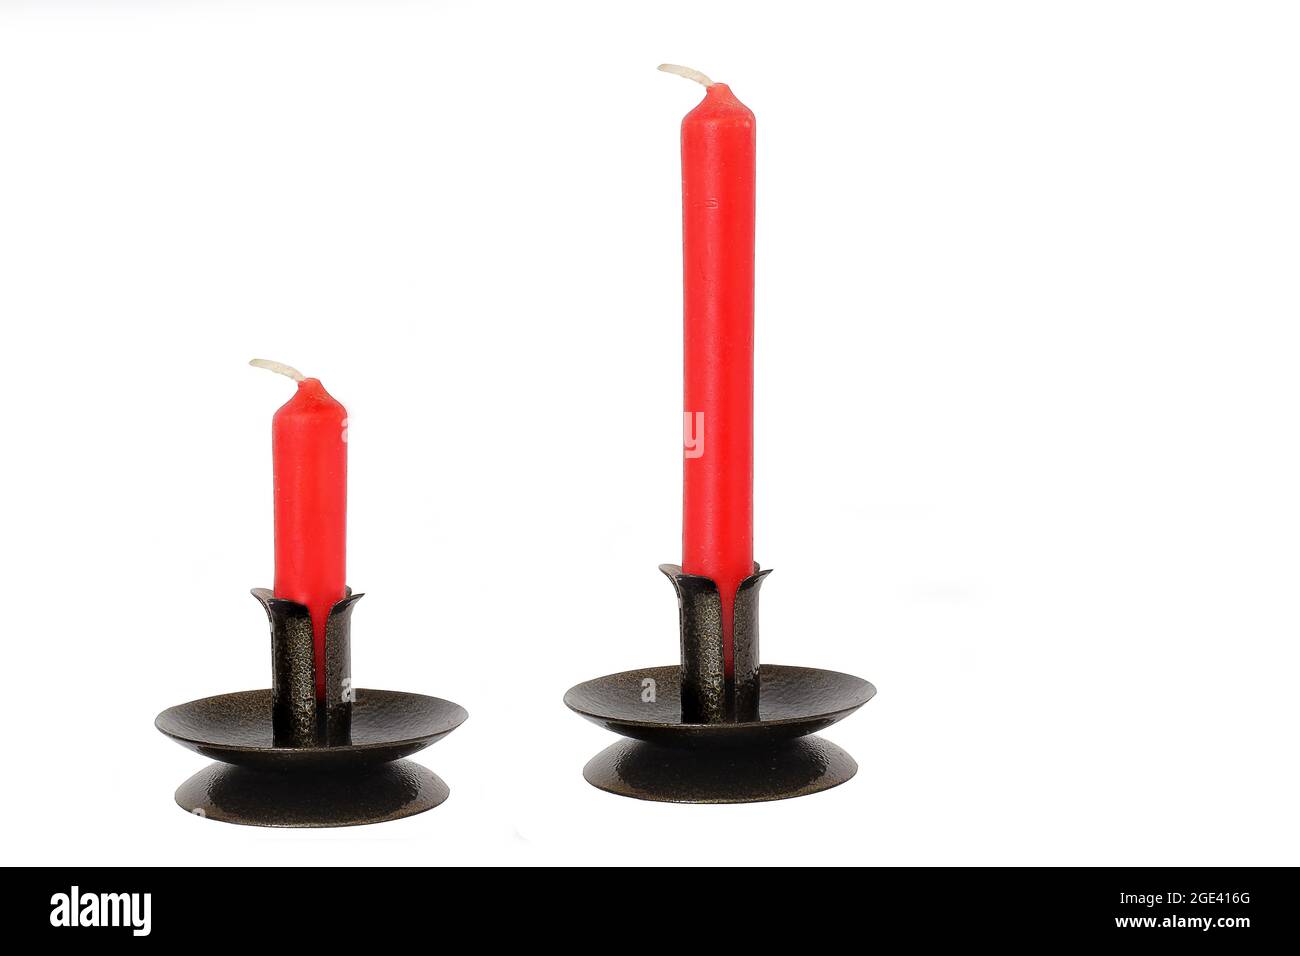 Candele rosse. Candele lunghe Foto stock - Alamy